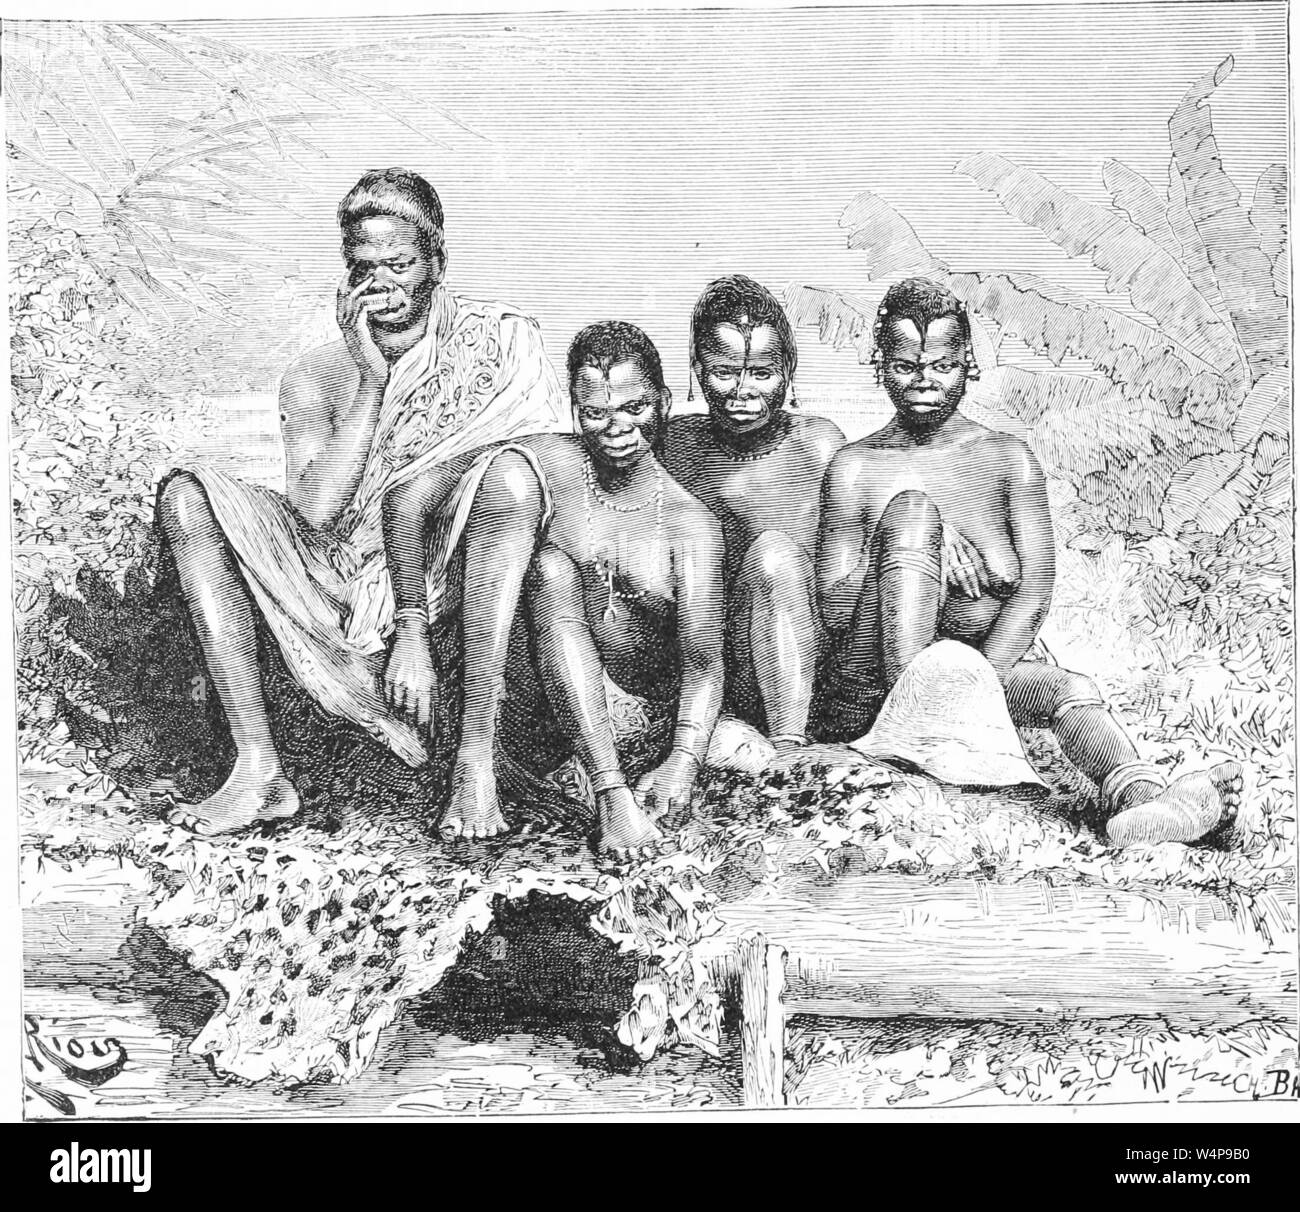 Engraved drawing of the polygamist Djoumba and his wives, from the book 'Ridpath's Universal history' by John Clark Ridpath, 1897. Courtesy Internet Archive. () Stock Photo